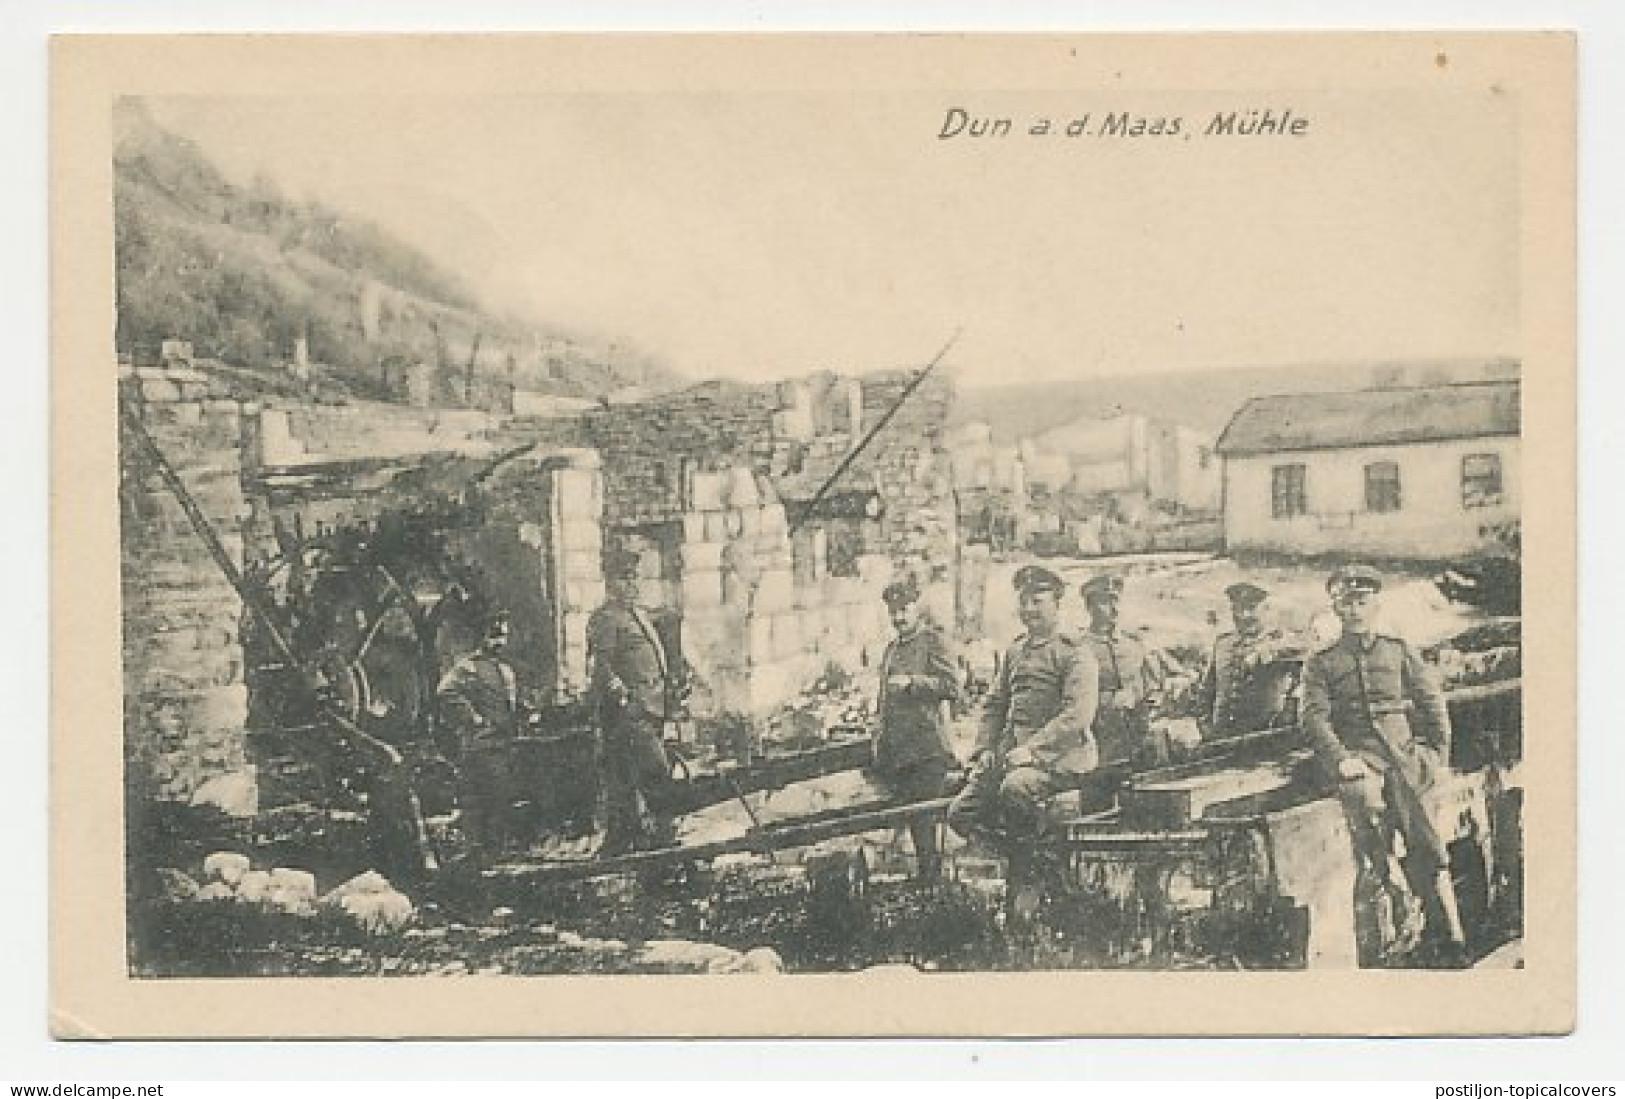 Fieldpost Postcard Germany / France 1916 Soldiers - Dun Sur Meuse - WWI - WW1